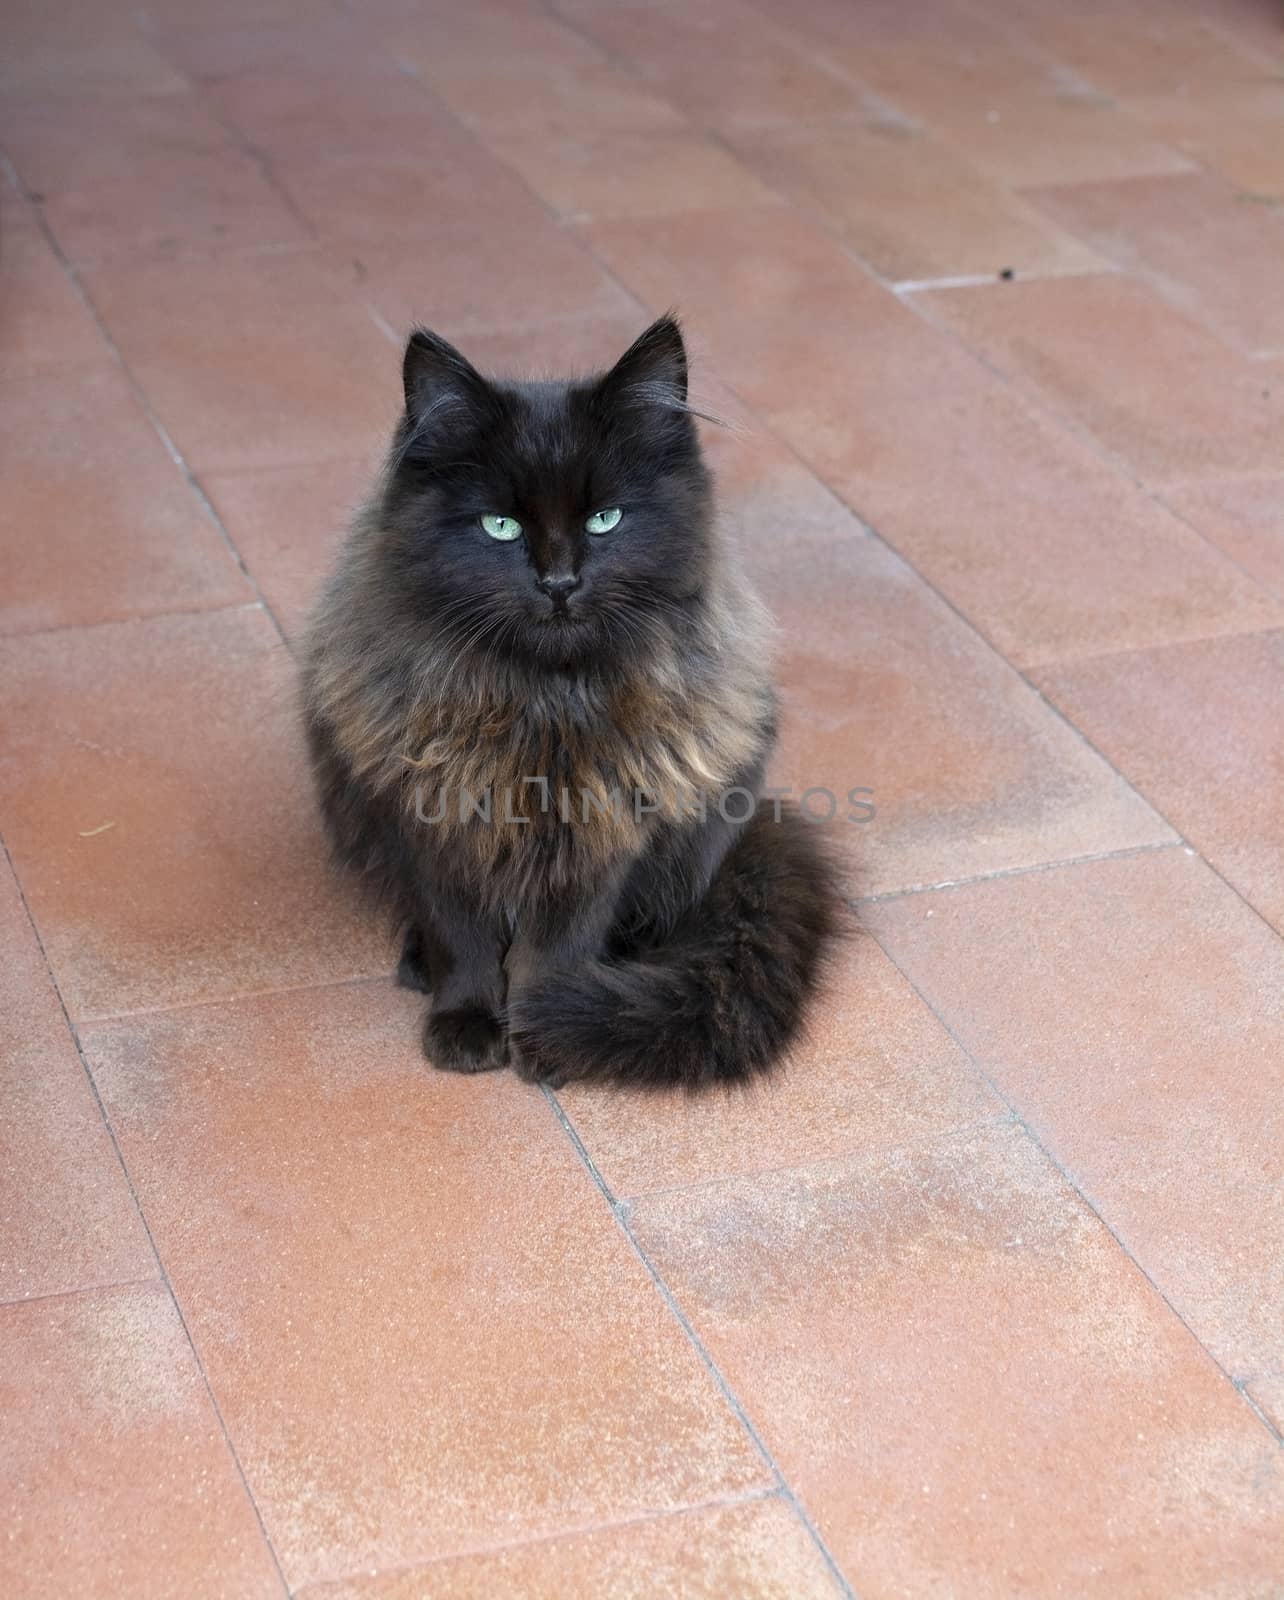 Beautiful dark brown fluffy cat with emerald green eyes on red terracotta floor looks into camera.